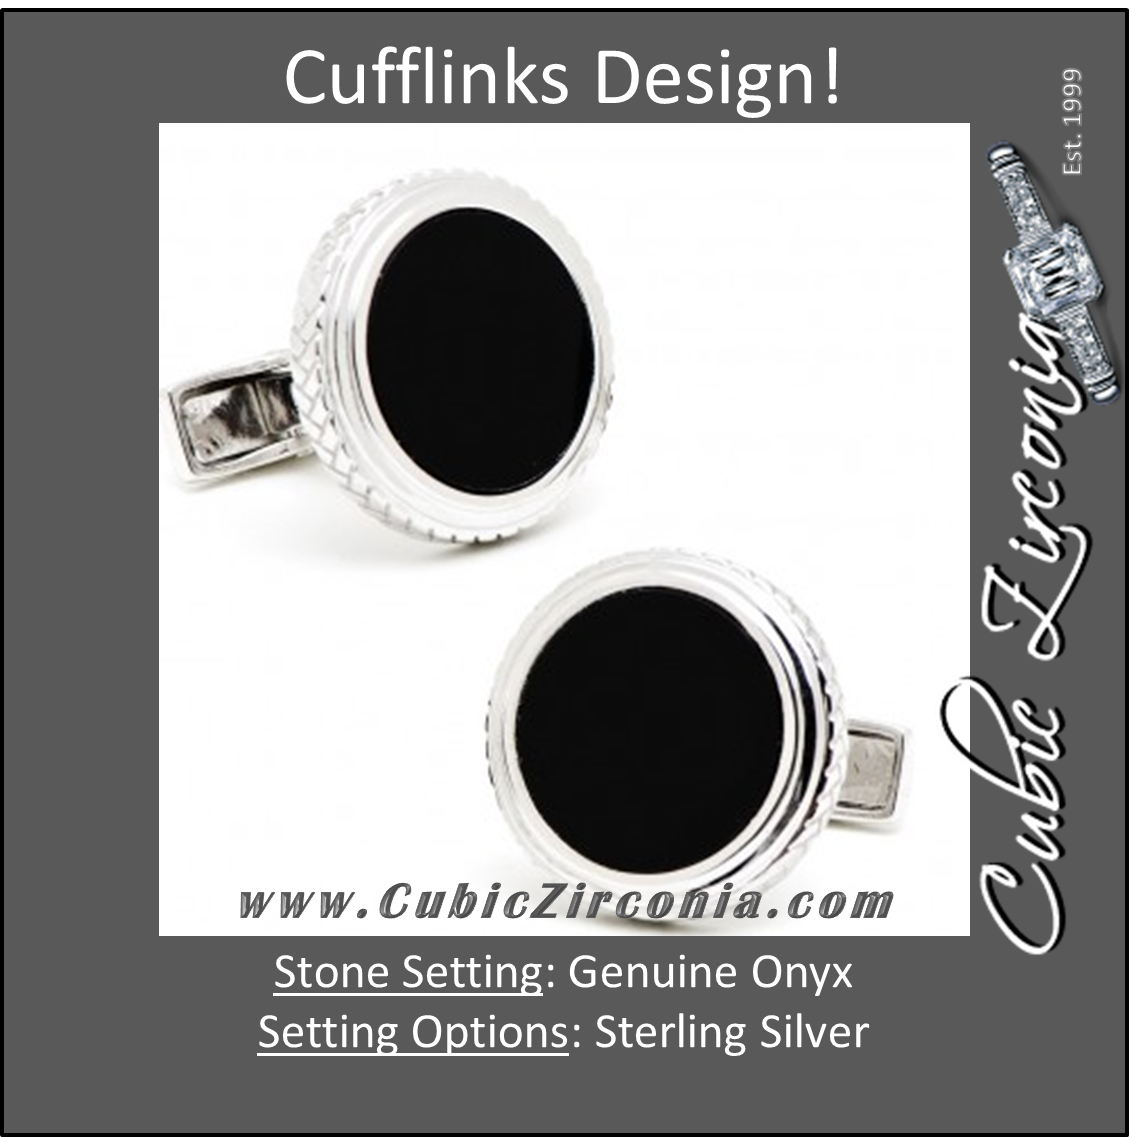 Men’s Cufflinks- Sterling Silver Round Opus Style Set with Genuine Onyx